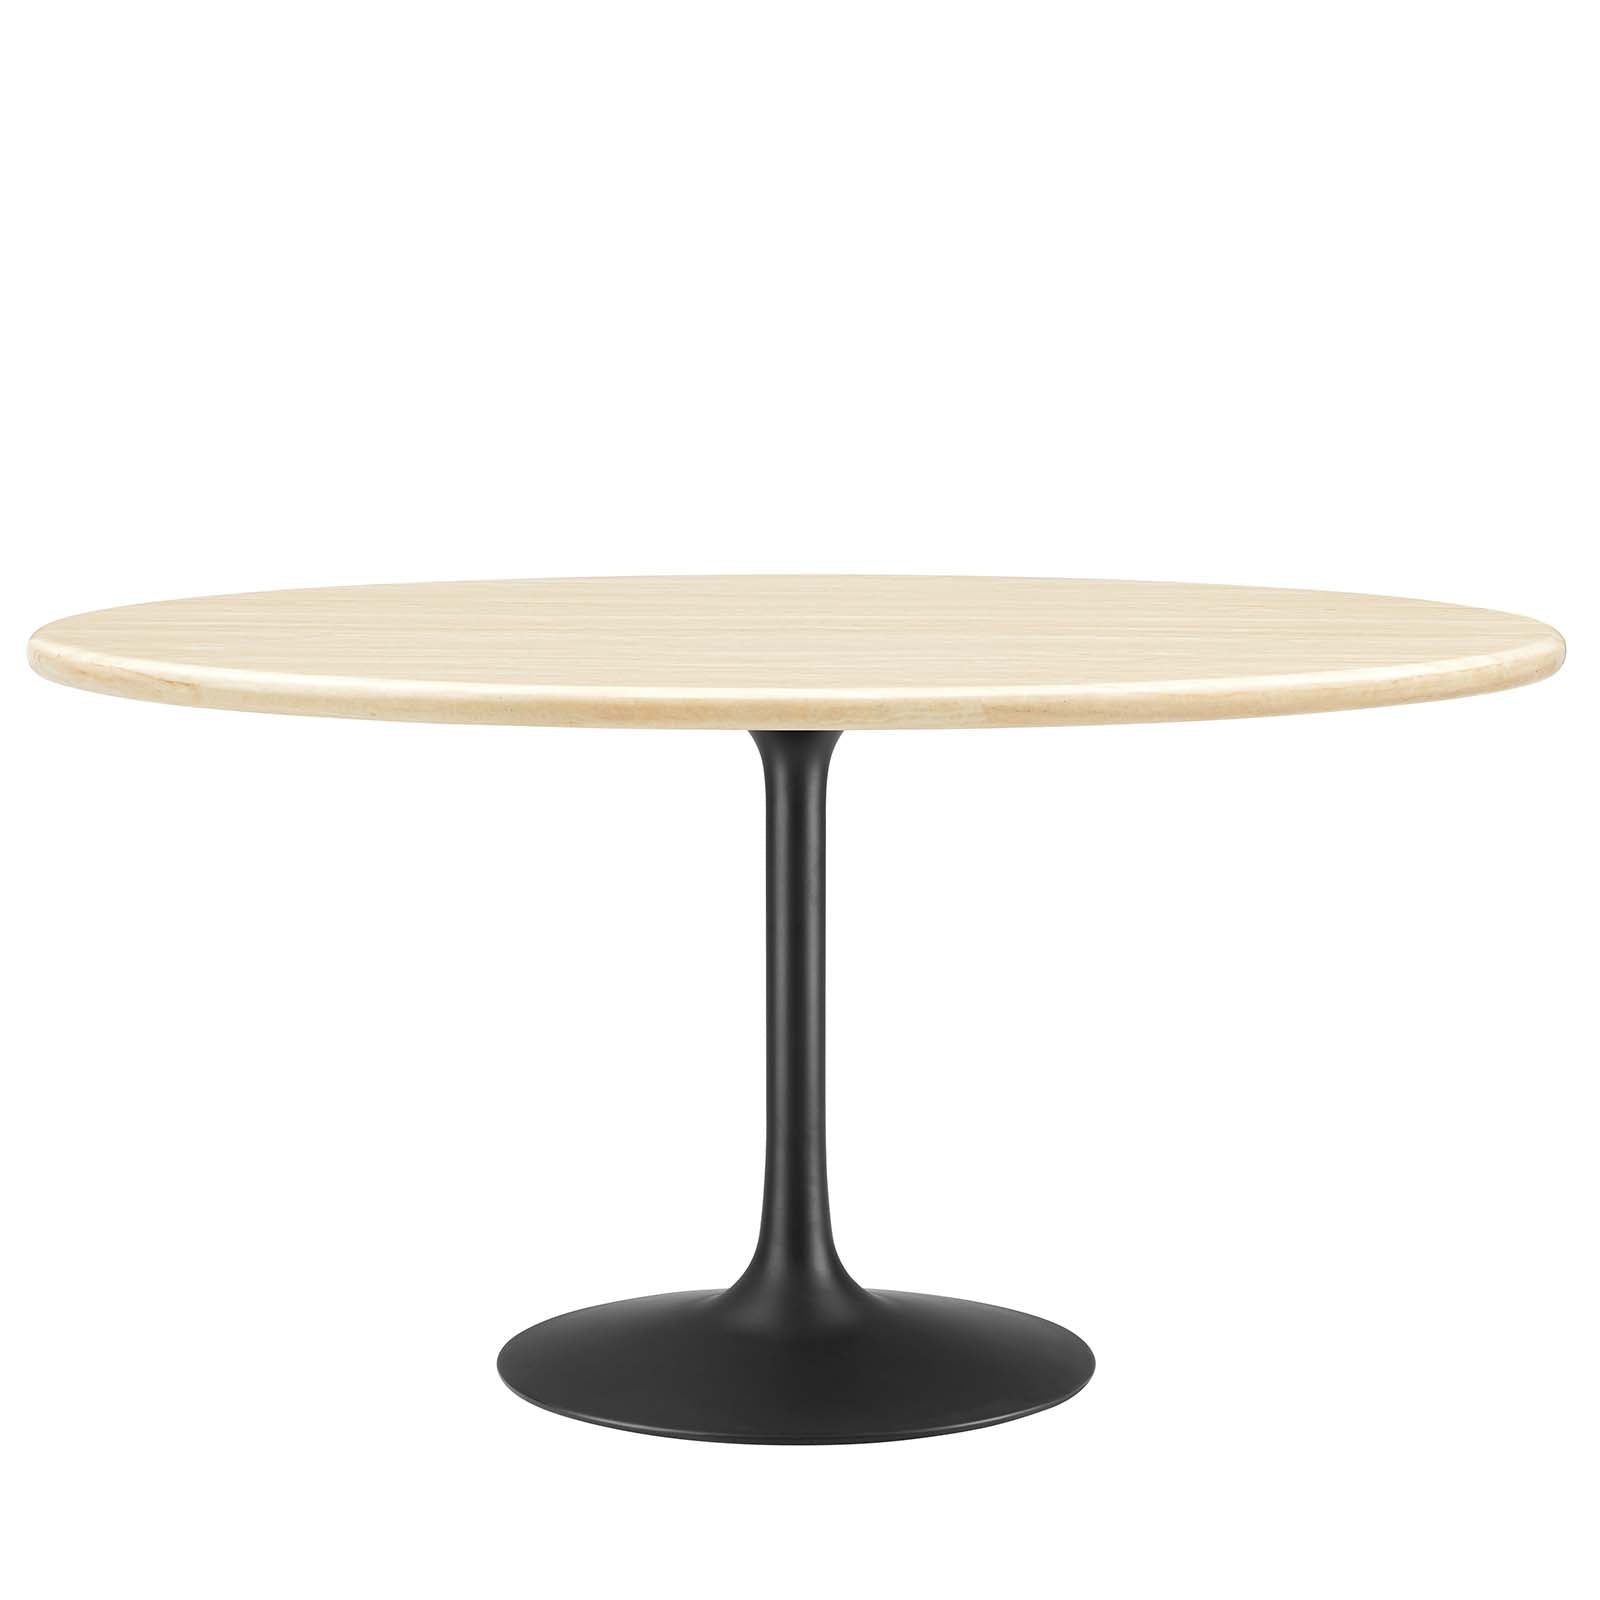 Lippa 60" Oval Artificial Travertine Dining Table - East Shore Modern Home Furnishings